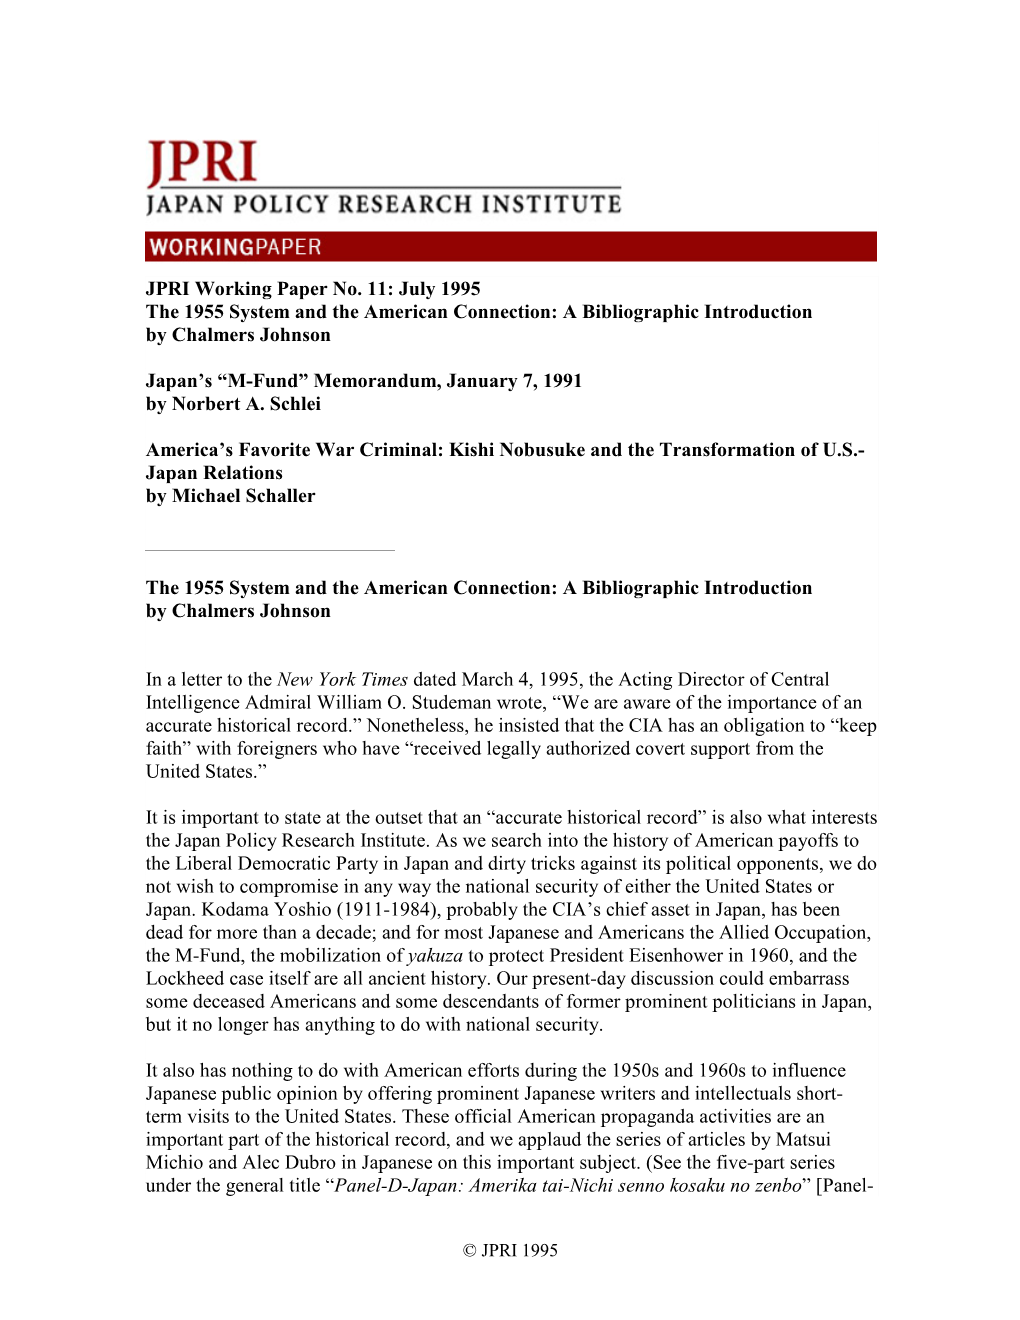 JPRI Working Paper No. 11: July 1995 the 1955 System and the American Connection: a Bibliographic Introduction by Chalmers Johnson